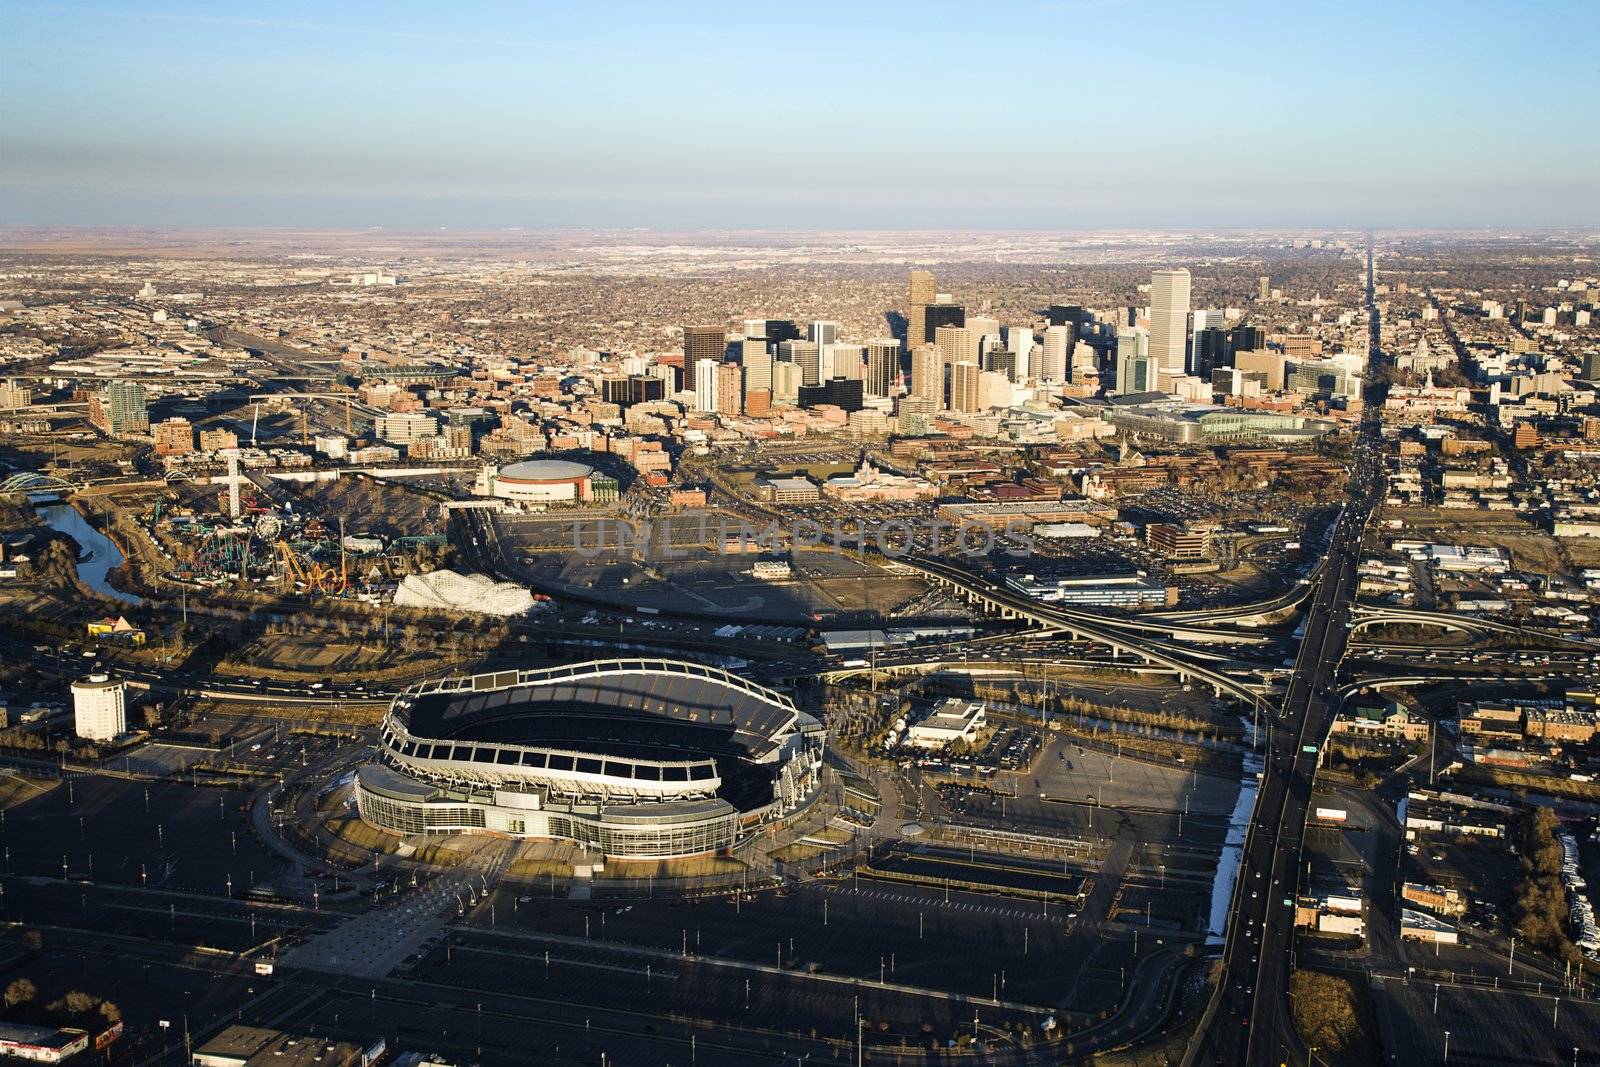 Aerial cityscape of urban Denver, Colorado, with Mile High stadium in foreground.